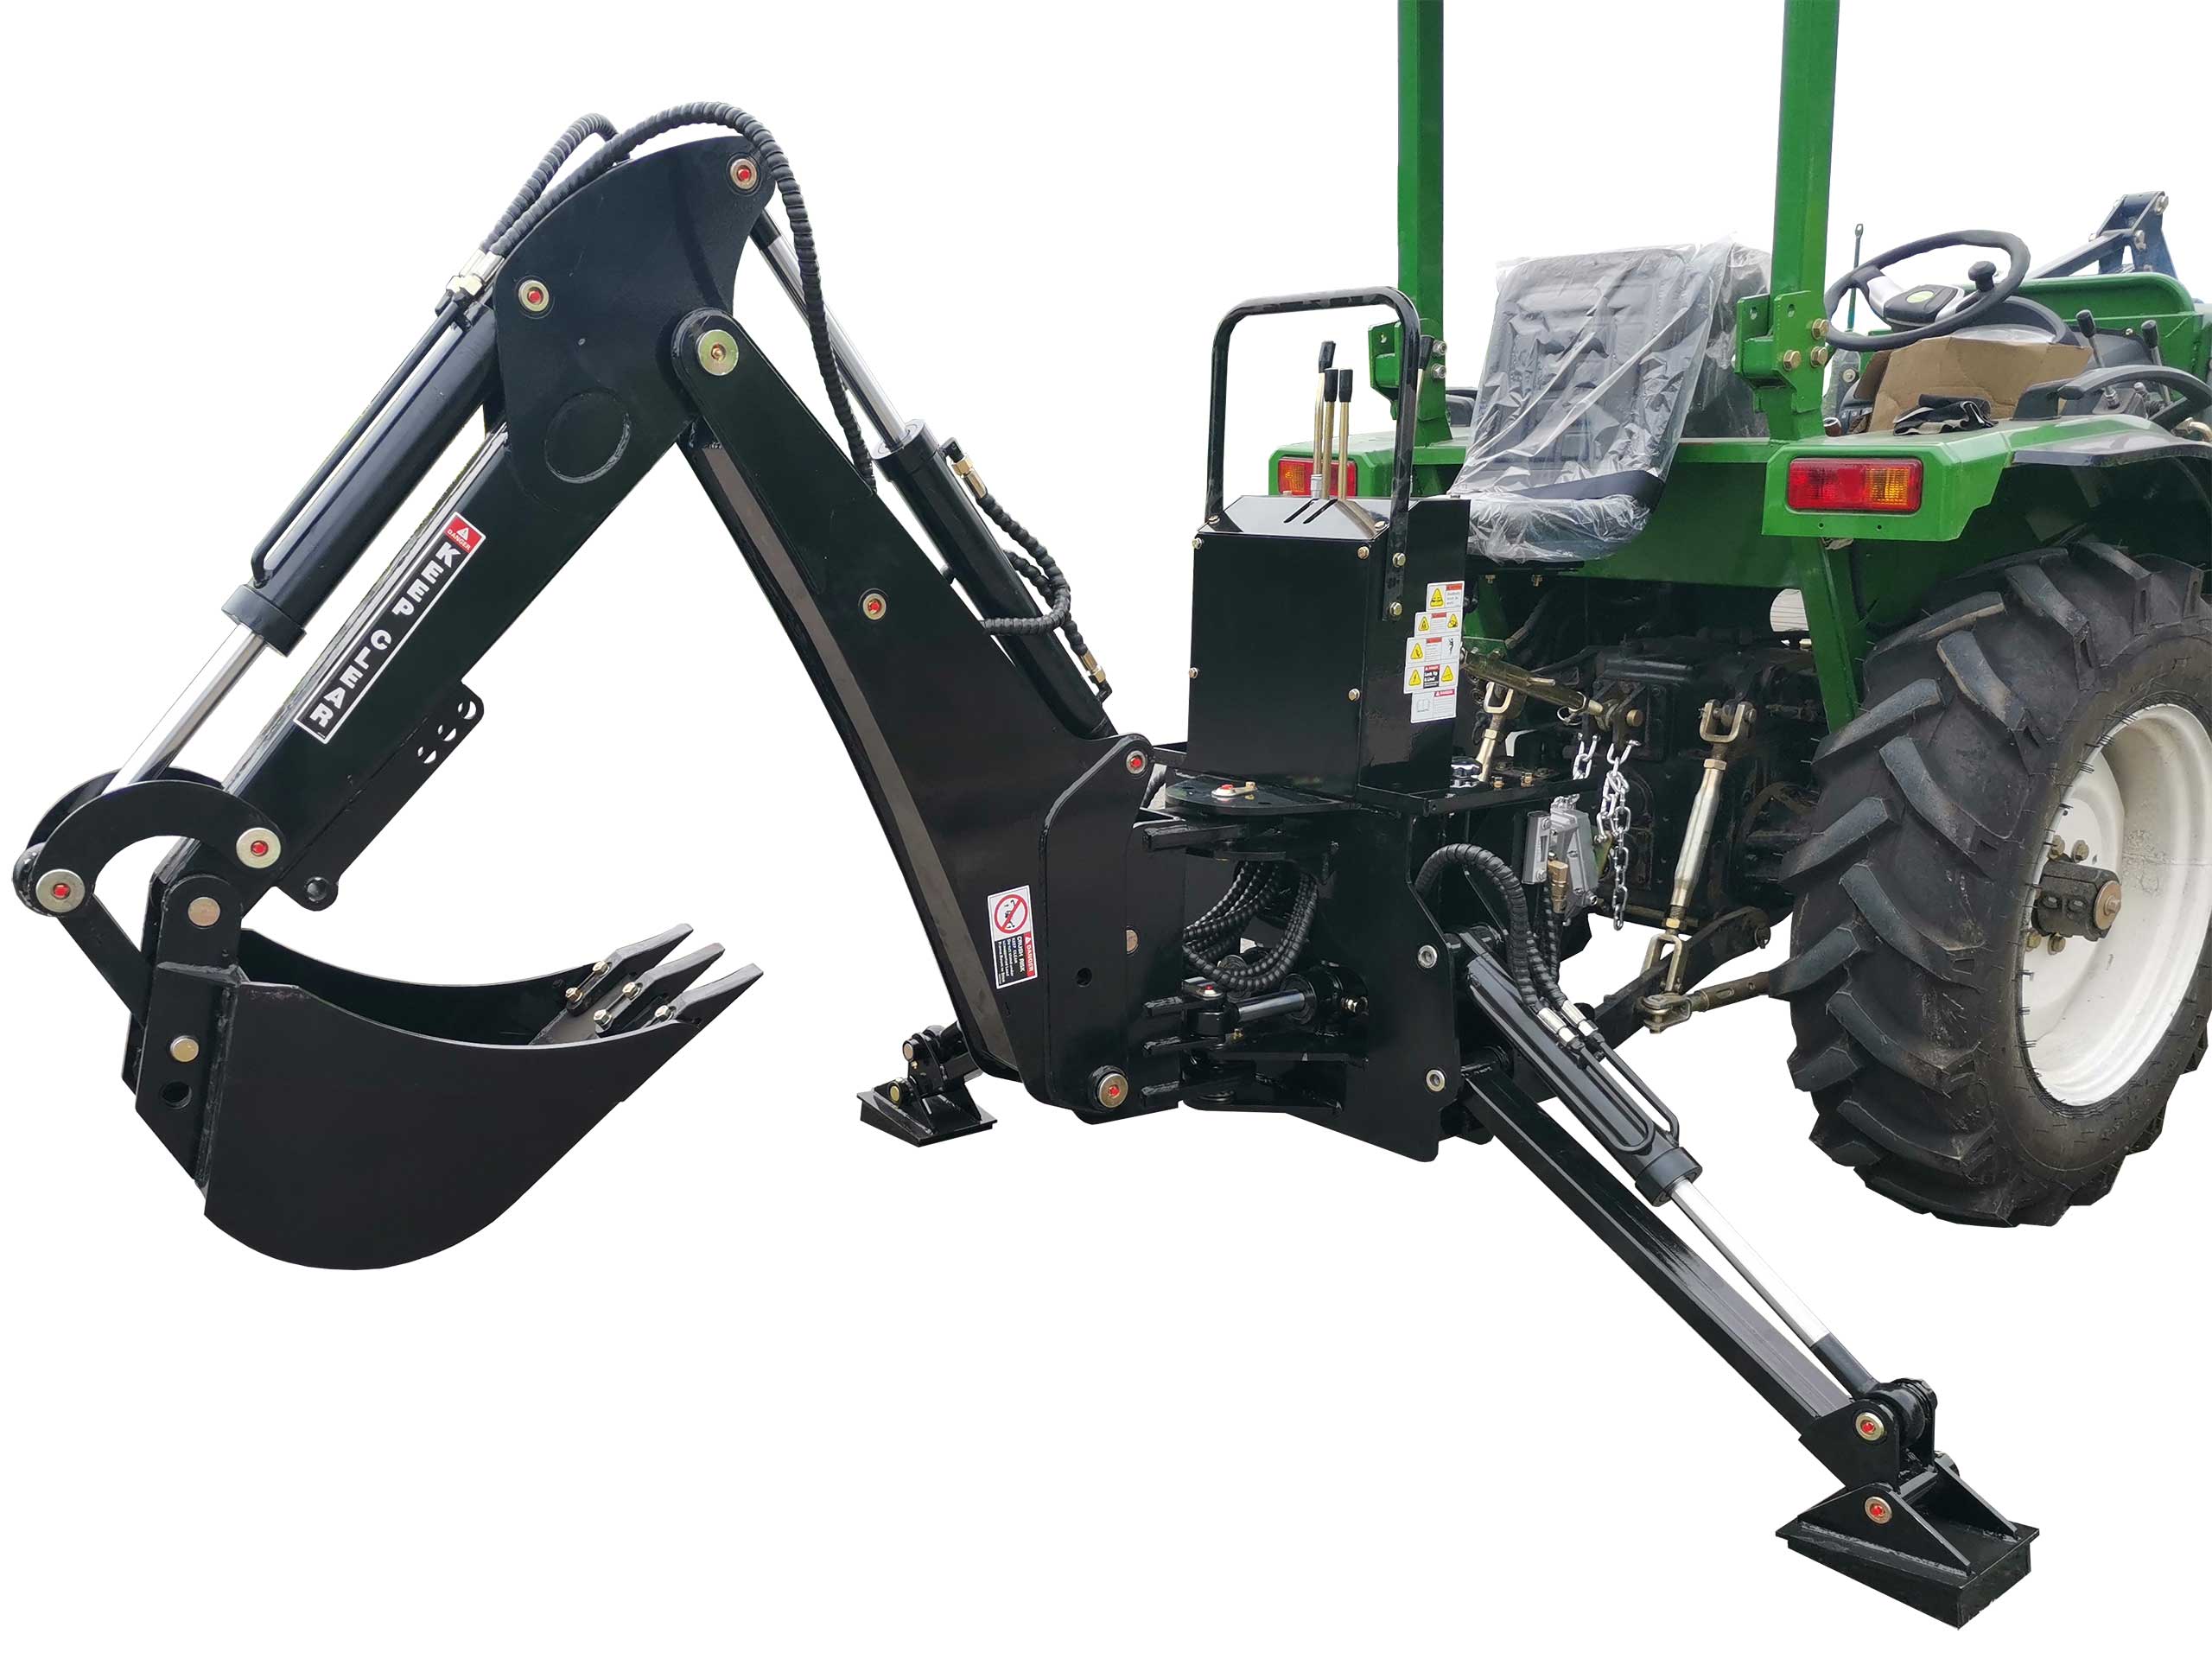 Bh8 3 Point Backhoe Attachment Compact And Durable Design